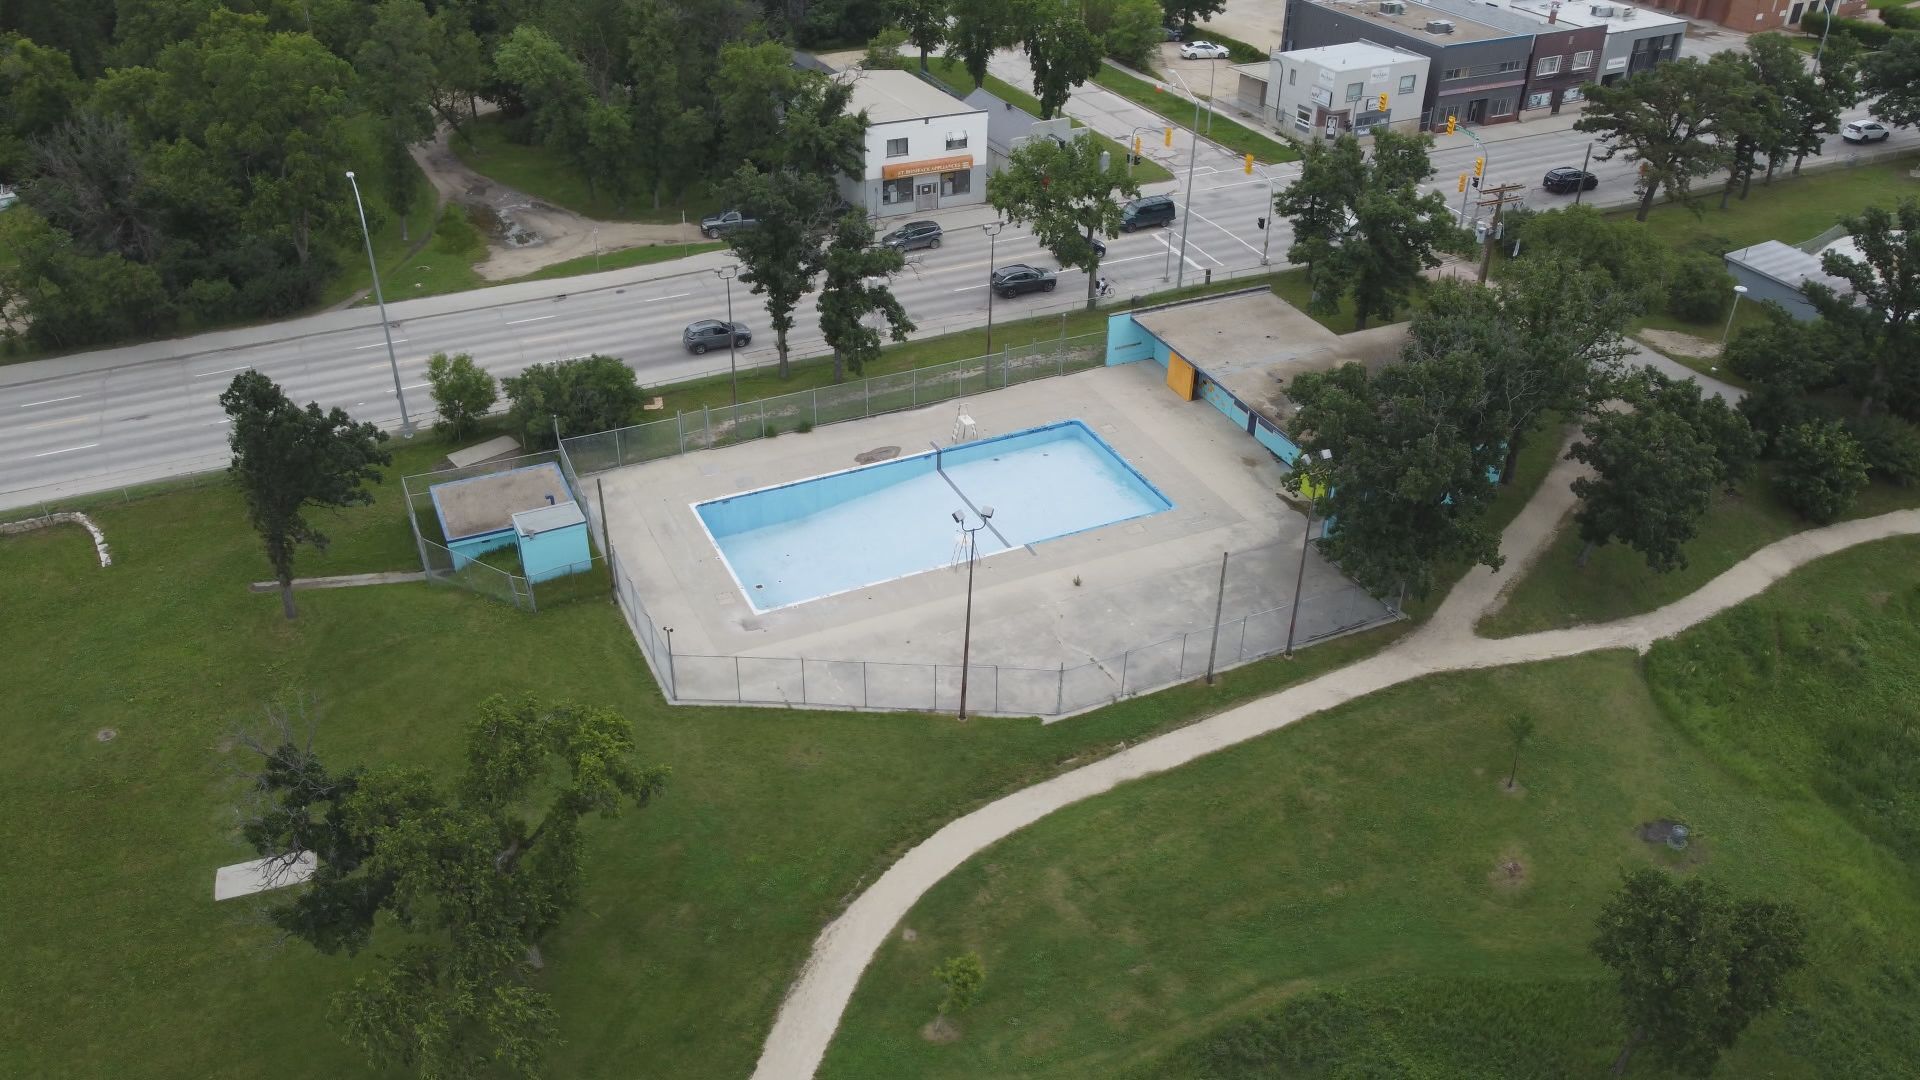 Happyland Pool to stay closed, despite fundraising efforts